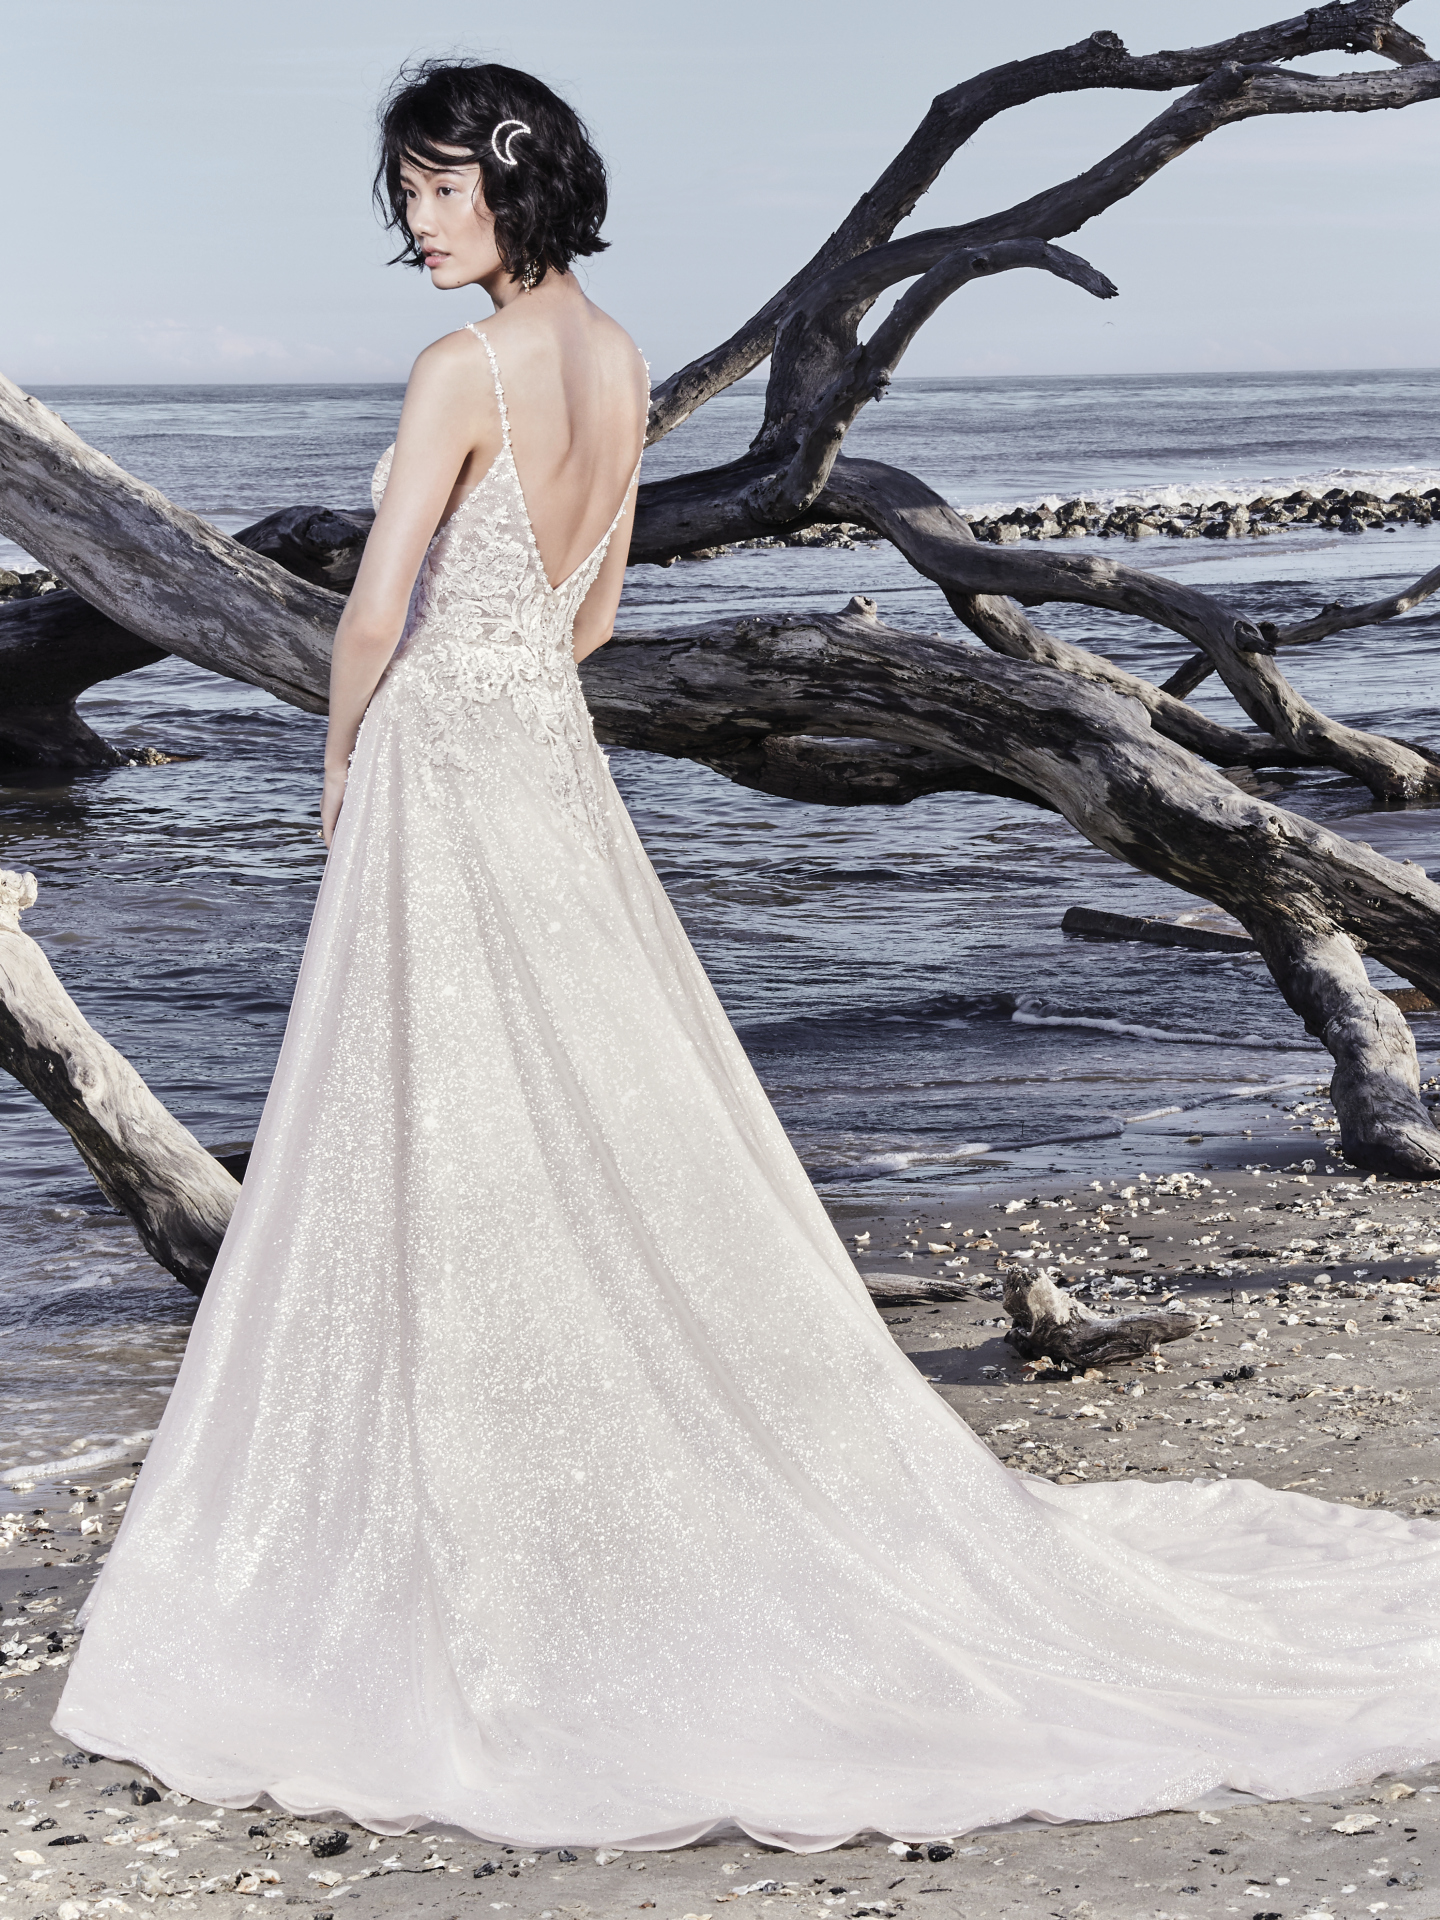 The Latest Glitzy, Red-Carpet-Ready Styles from Sottero and Midgley - Chad